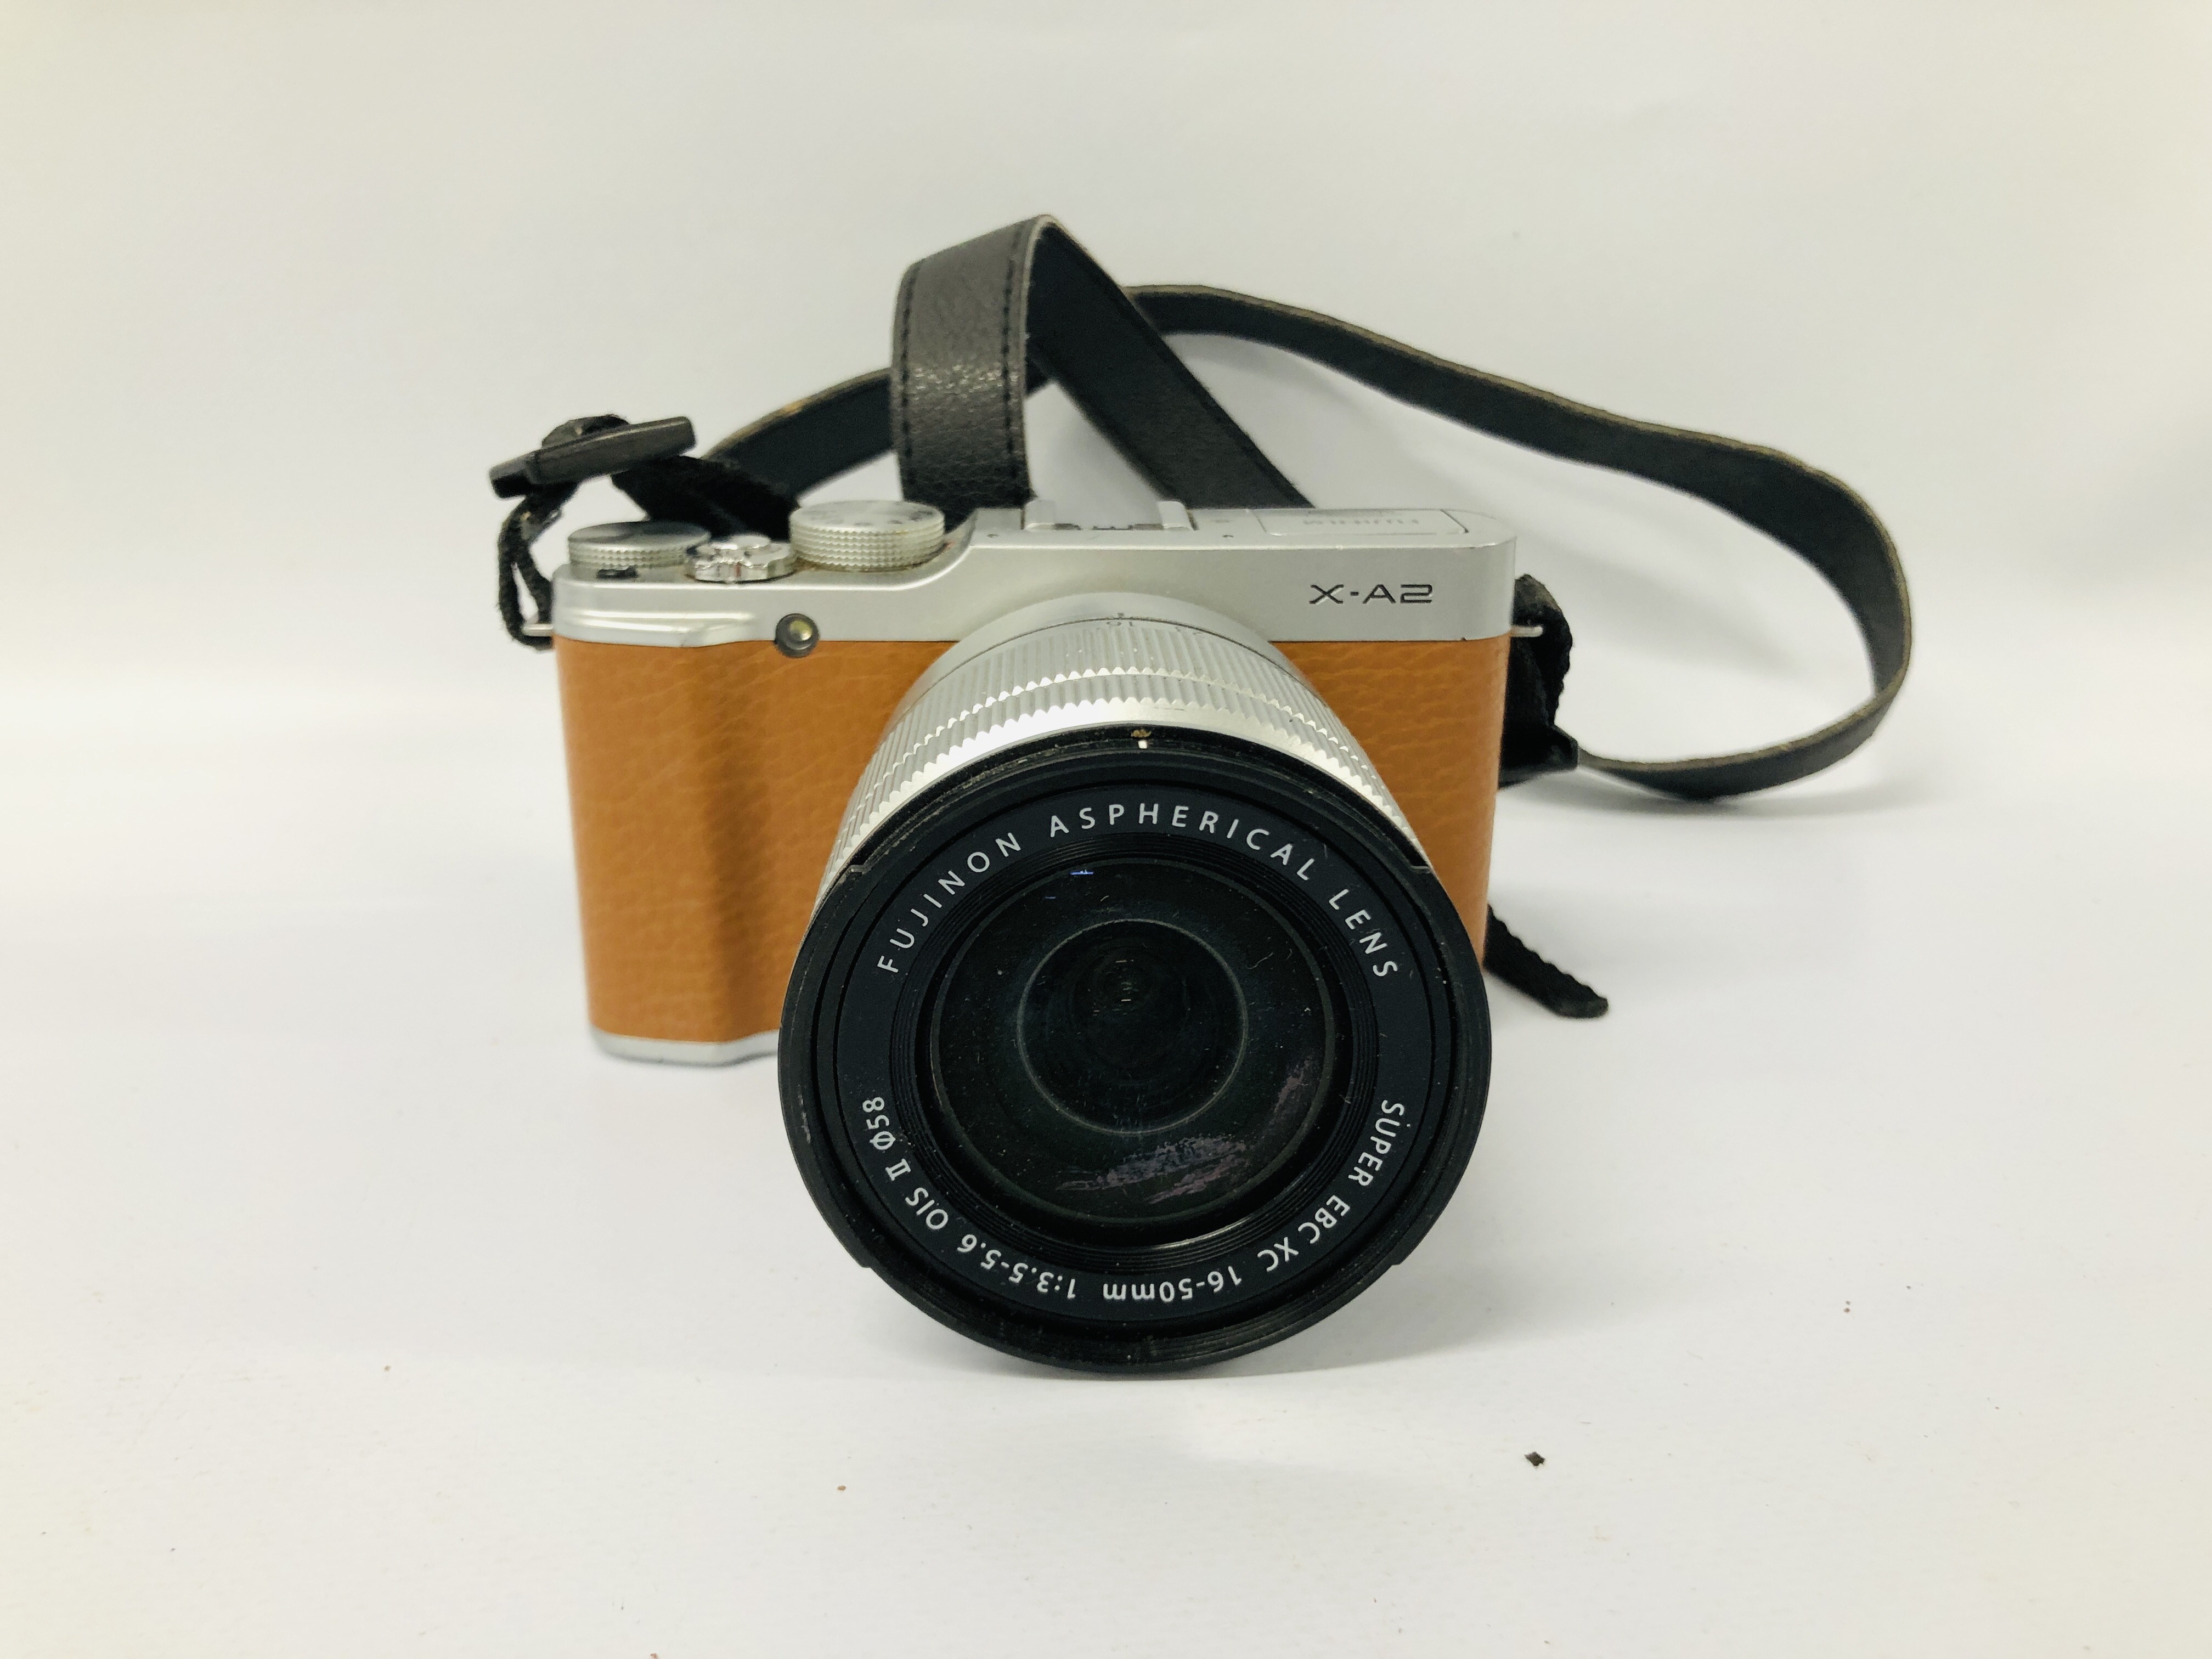 FUJIFILM X-A2 DIGITAL CAMERA FITTED WITH FUJIFILM XC 16-50 MM LENS (NO BATTERY) S/N 55L04338 - SOLD